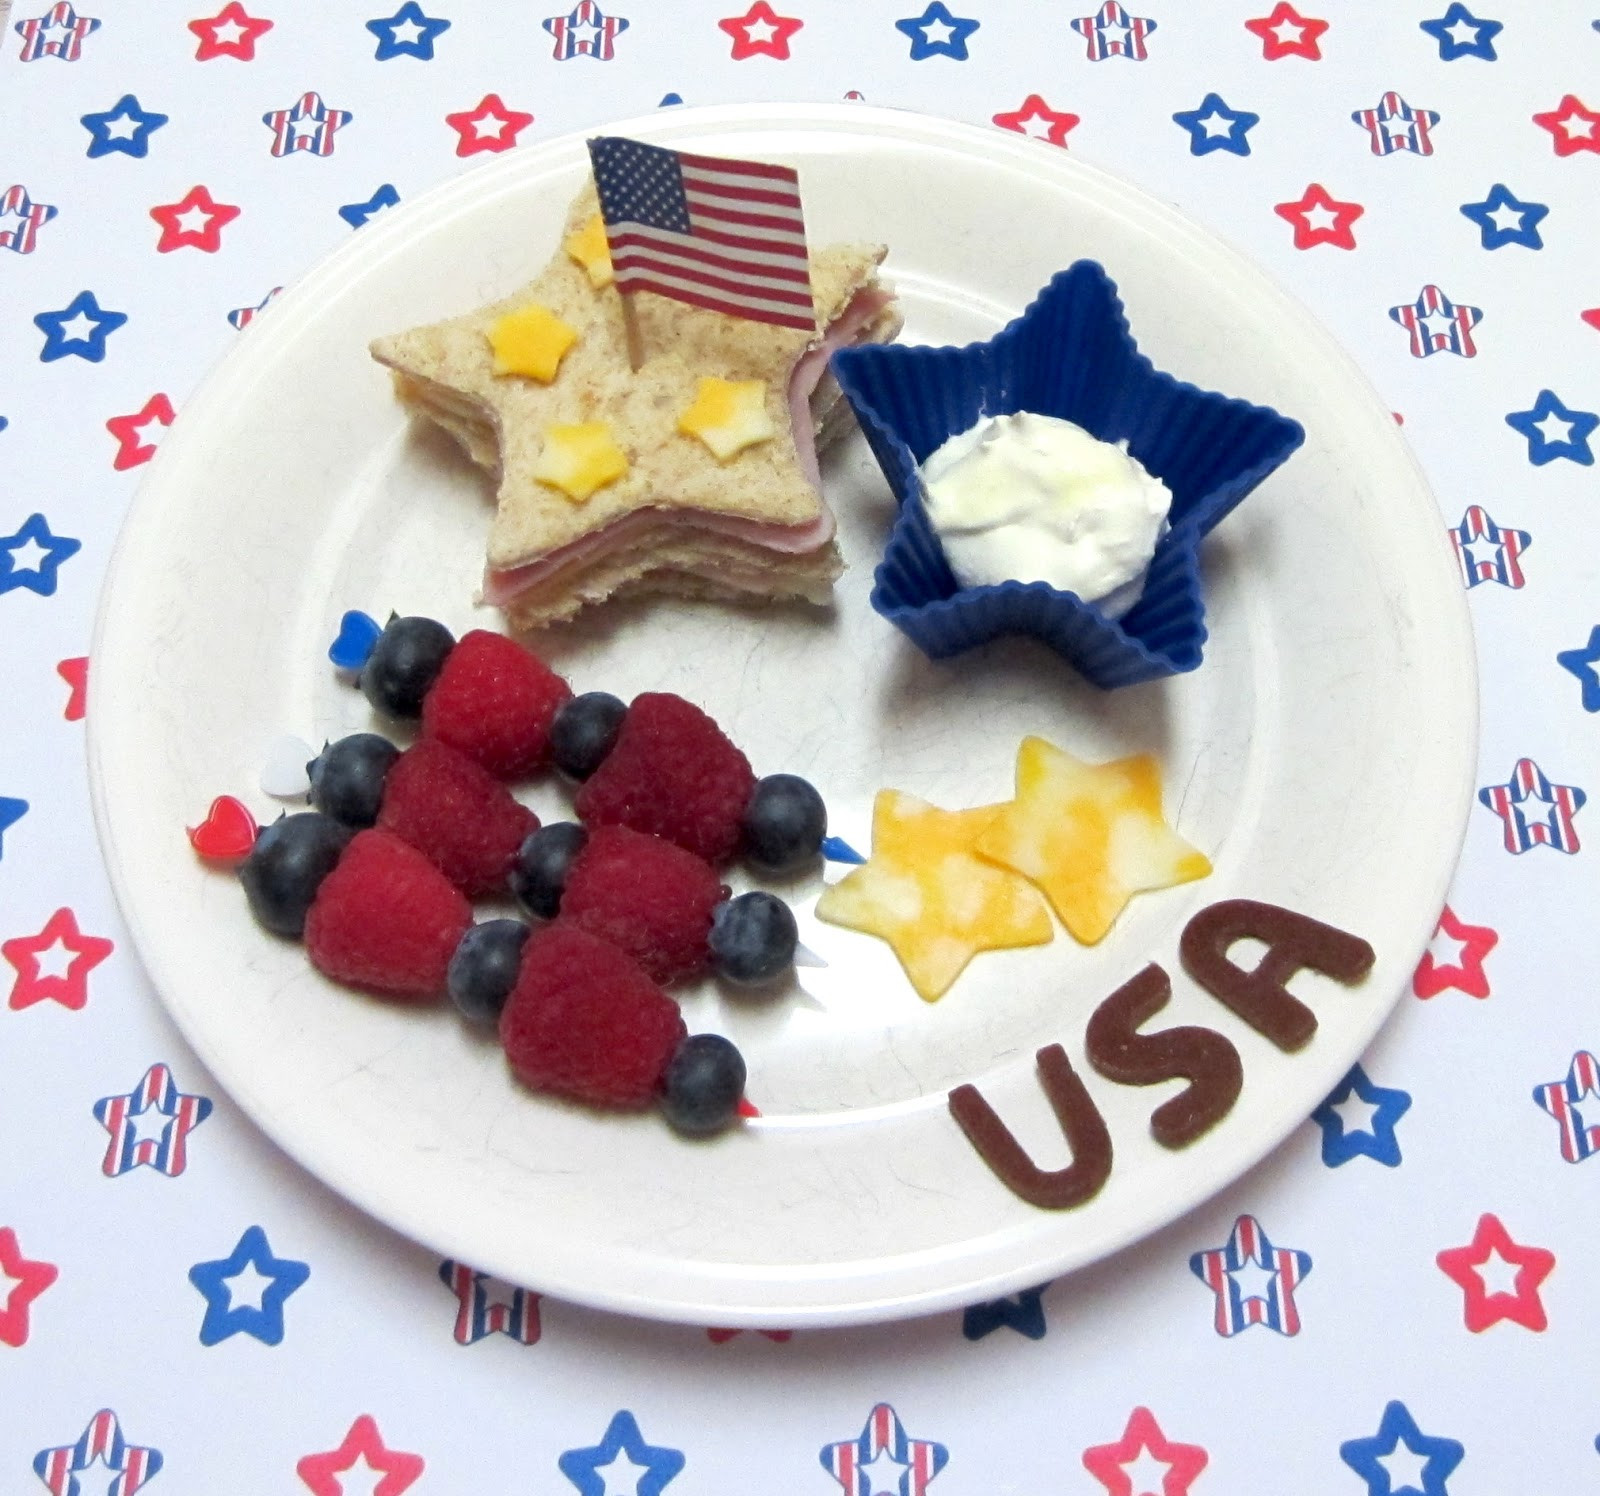 4th Of July Lunch Ideas
 BentoLunch What s for lunch at our house Fourth of